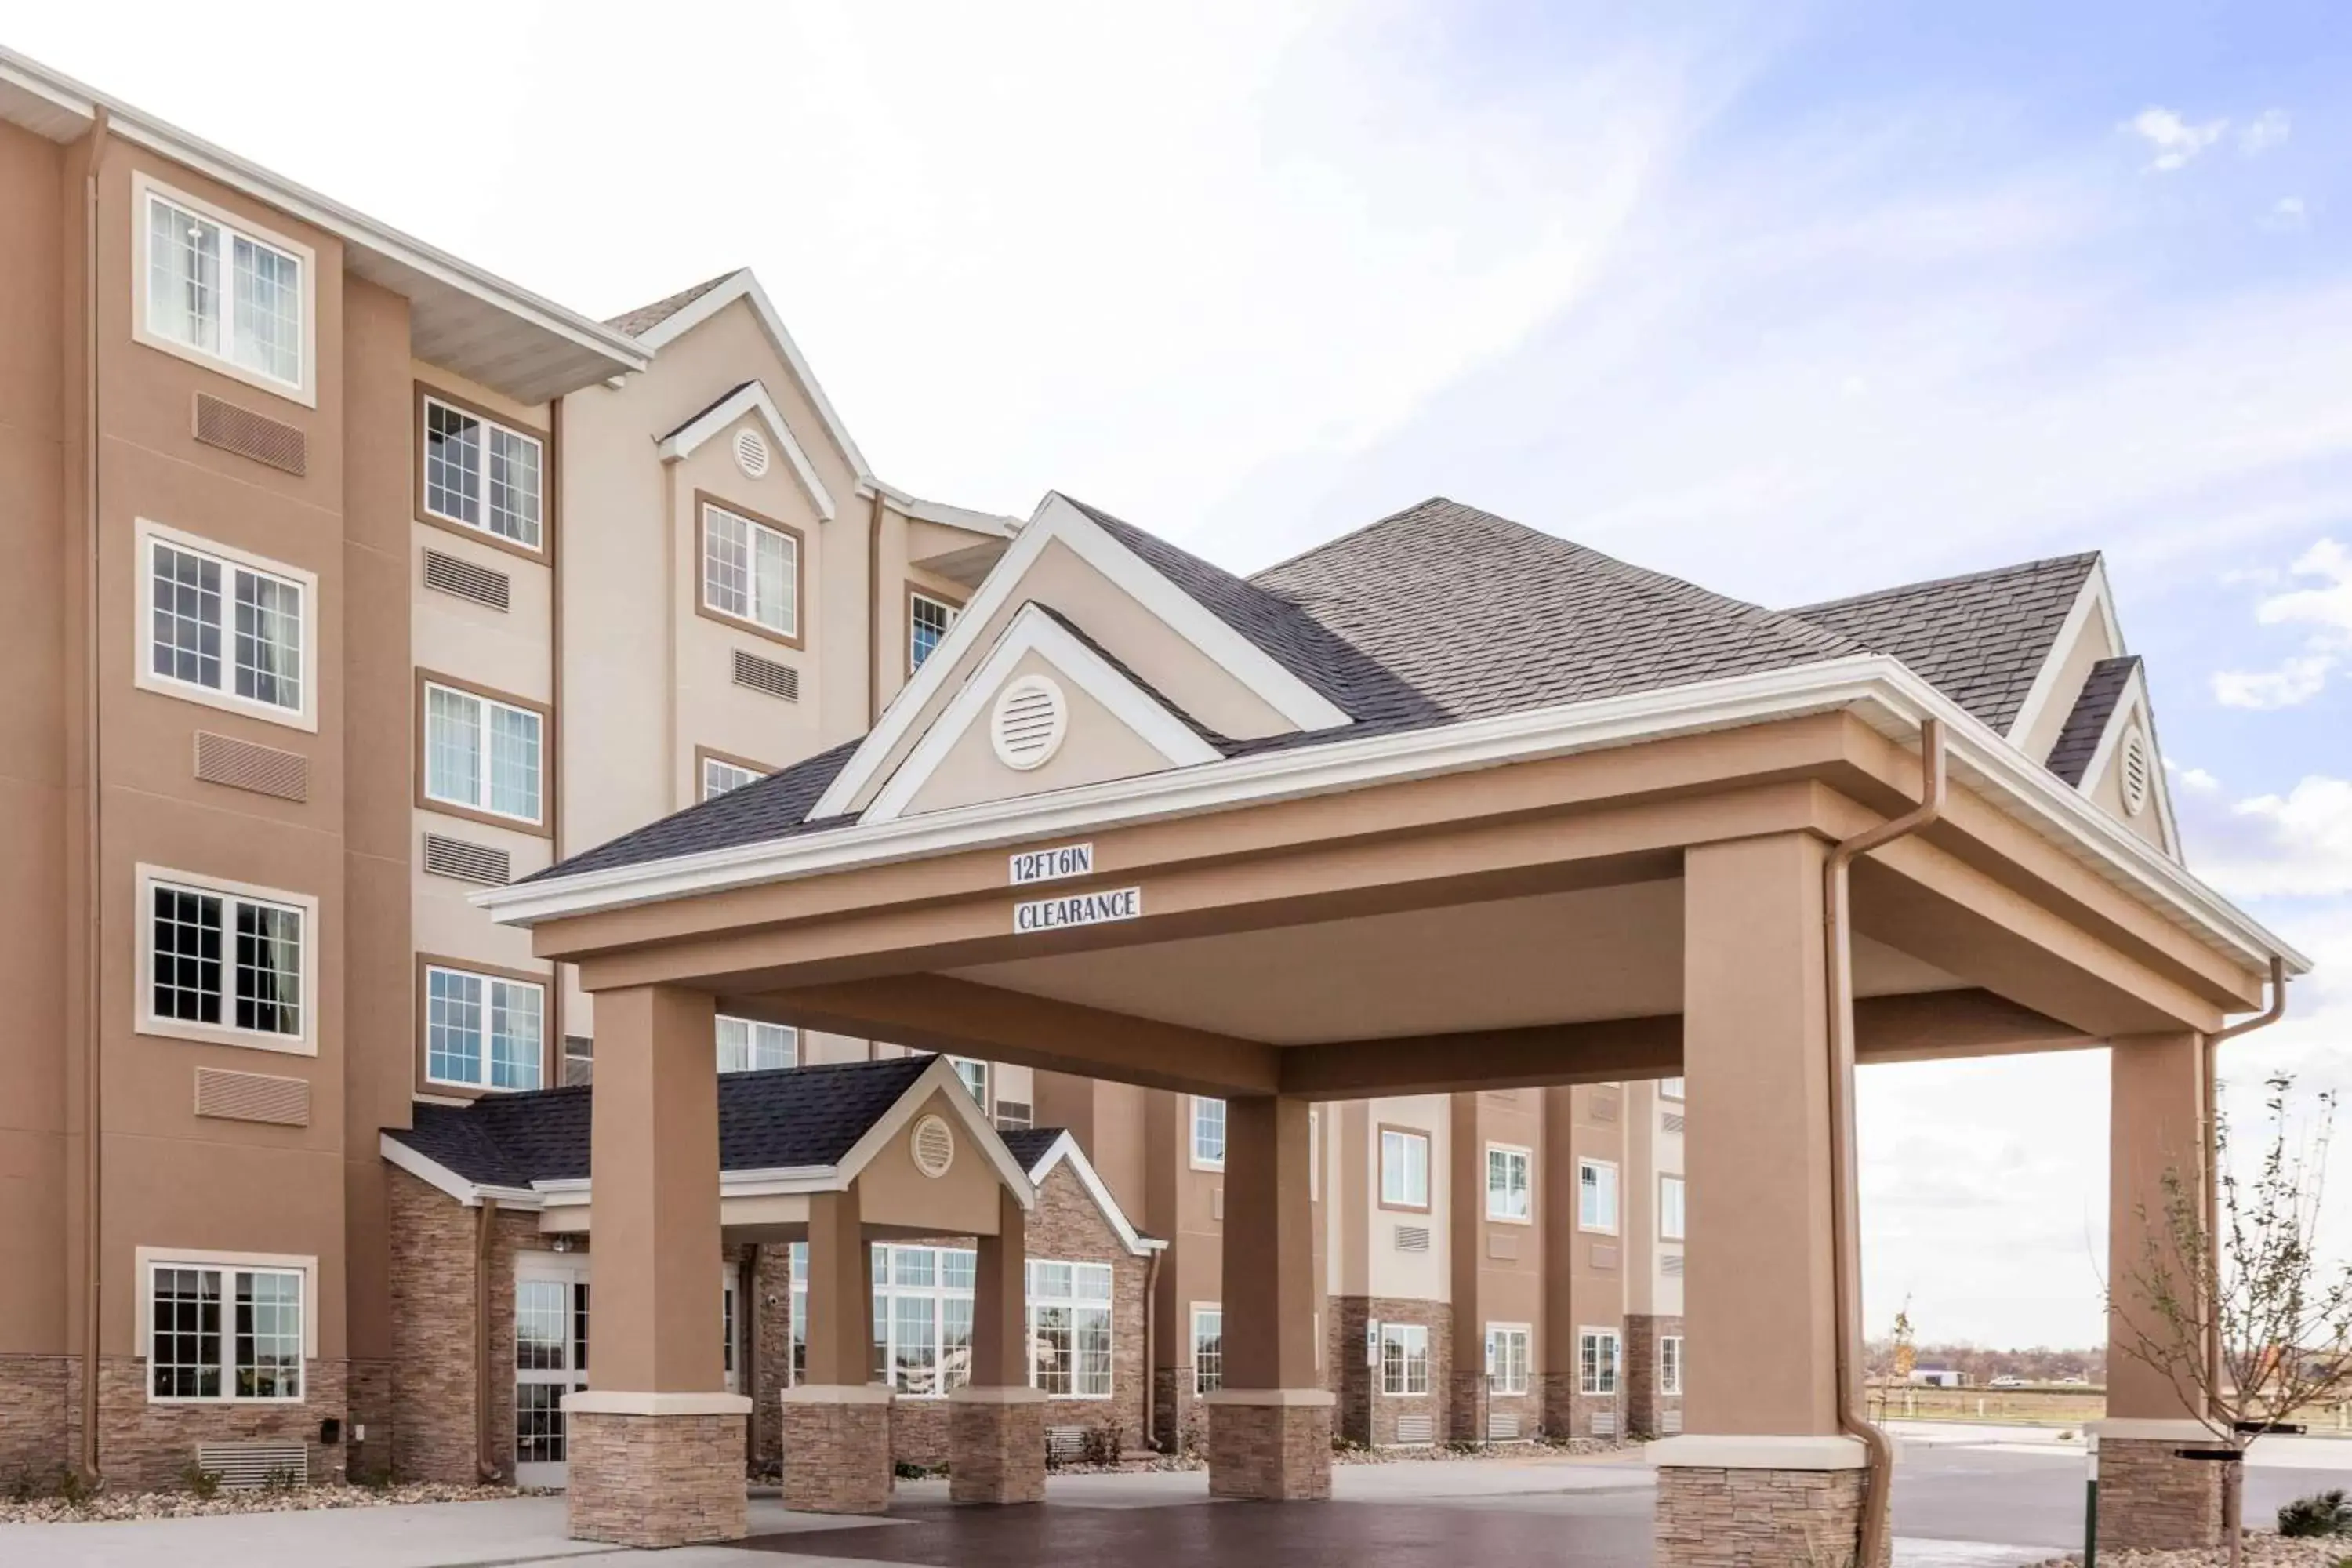 Property building in Microtel Inn & Suites by Wyndham West Fargo Near Medical Center